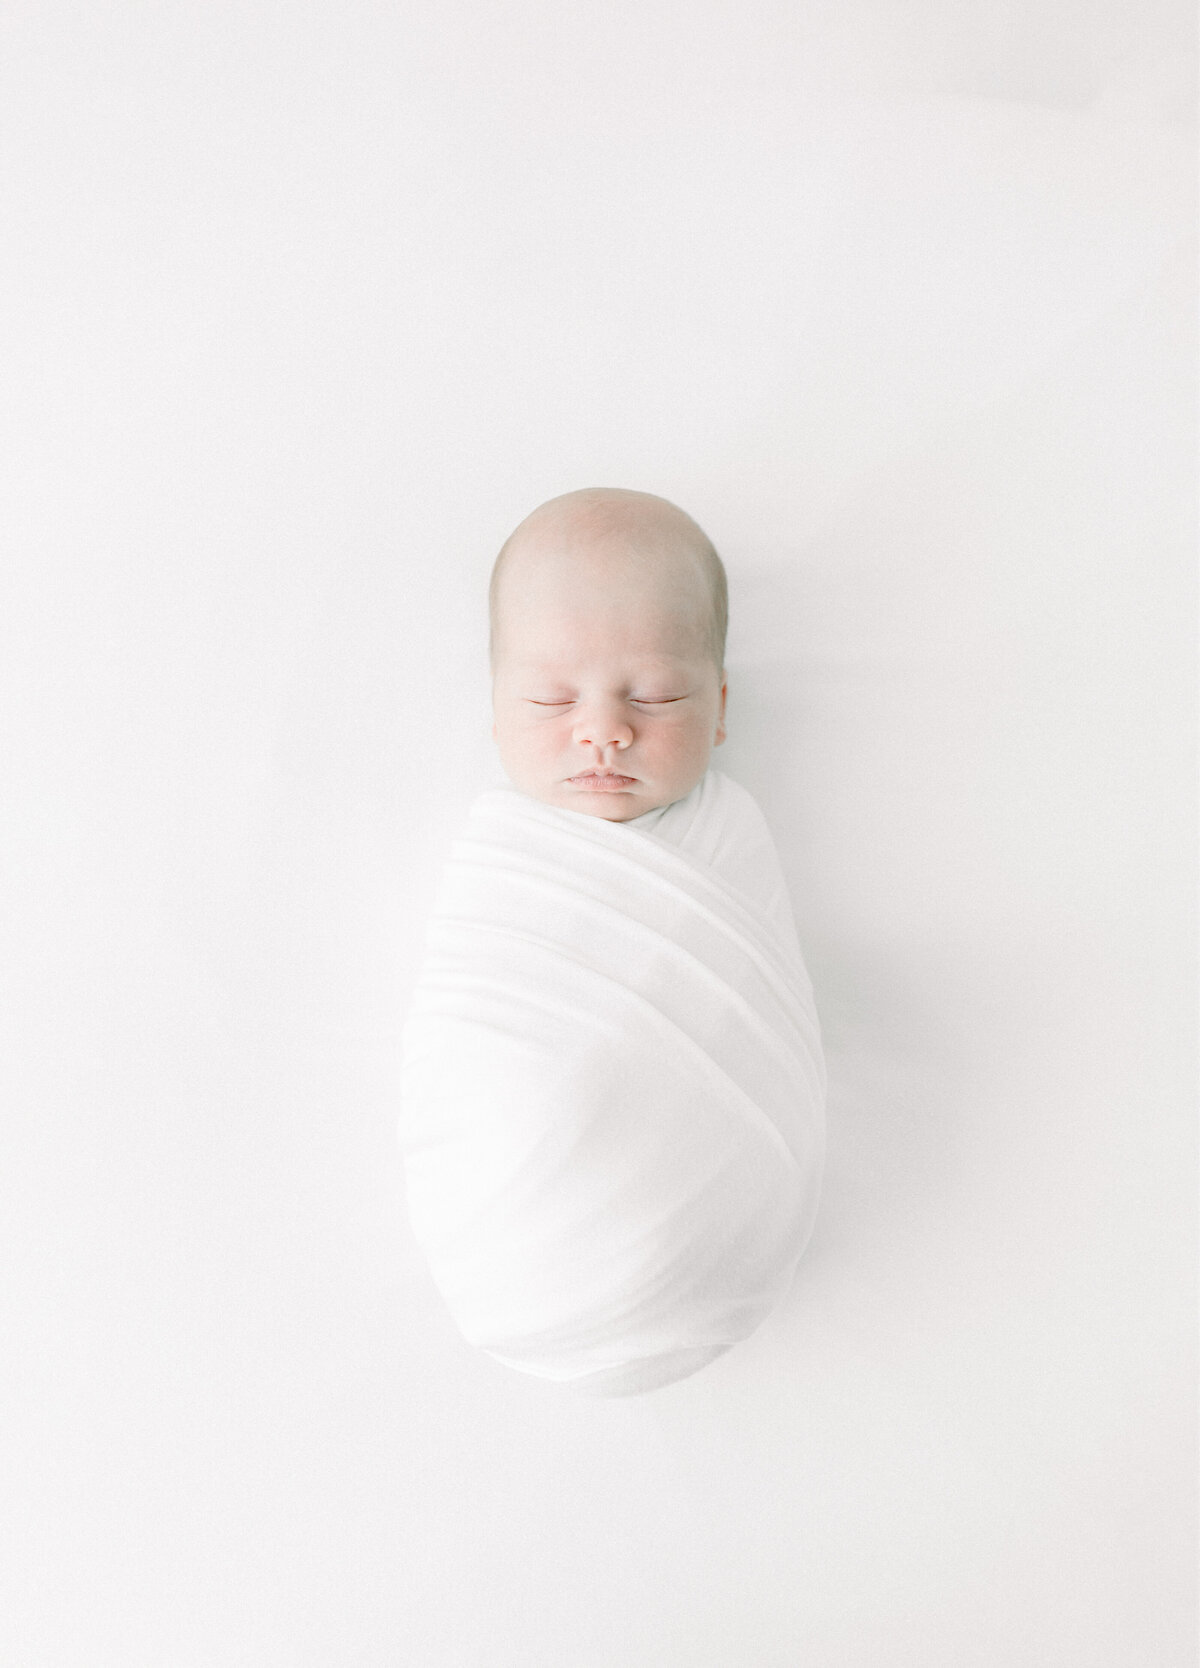 A newborn baby wrapped and laying down